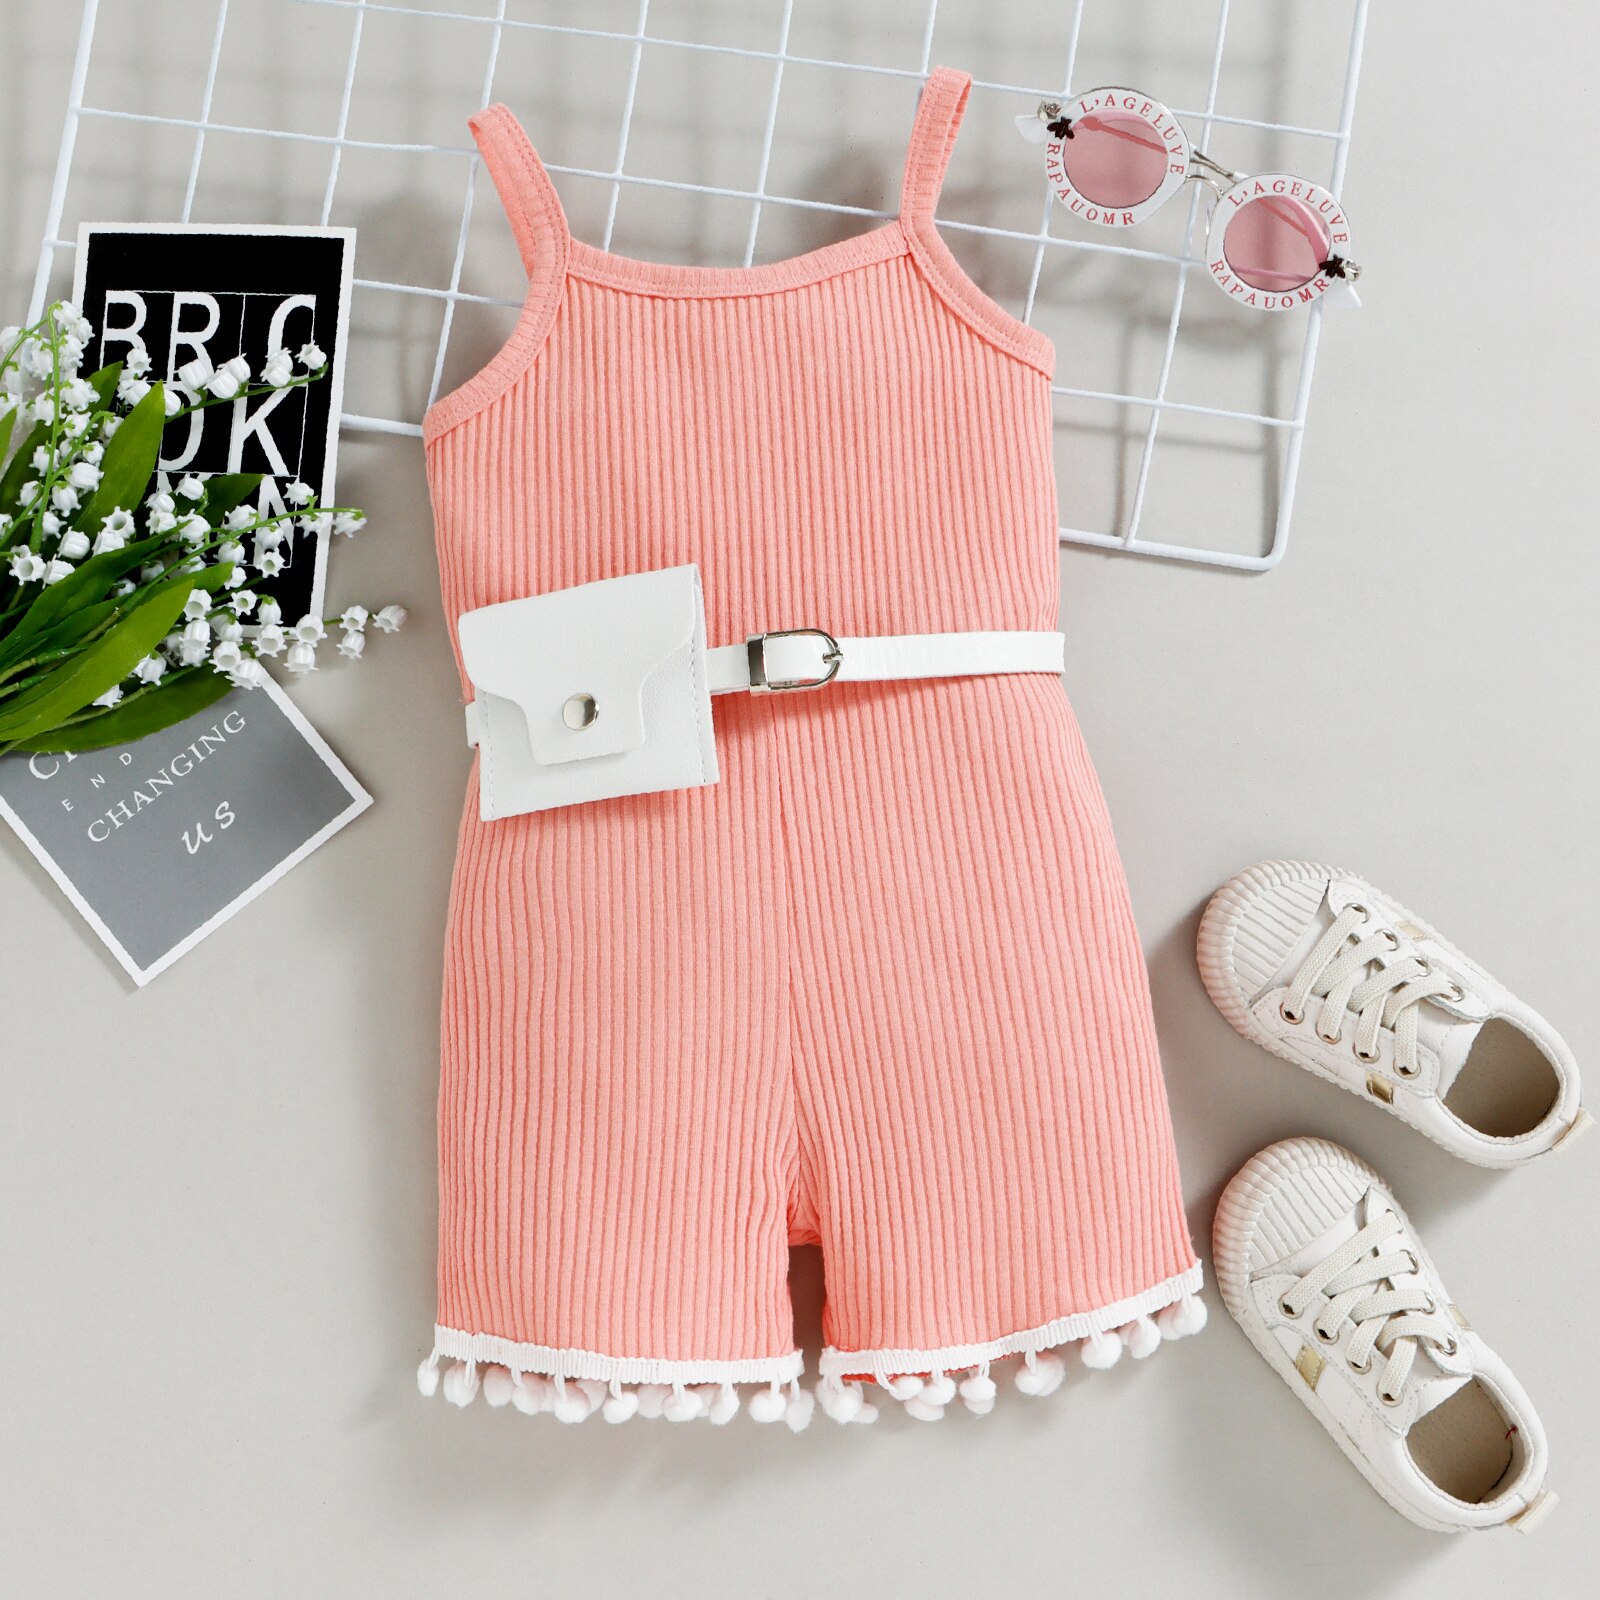 Kids-Summer-Outfit-Contrast-Color-U-Neck-Sleeveless-Playsuit-Waist-Bag-for-Baby-Girls-Pink-Gray-1